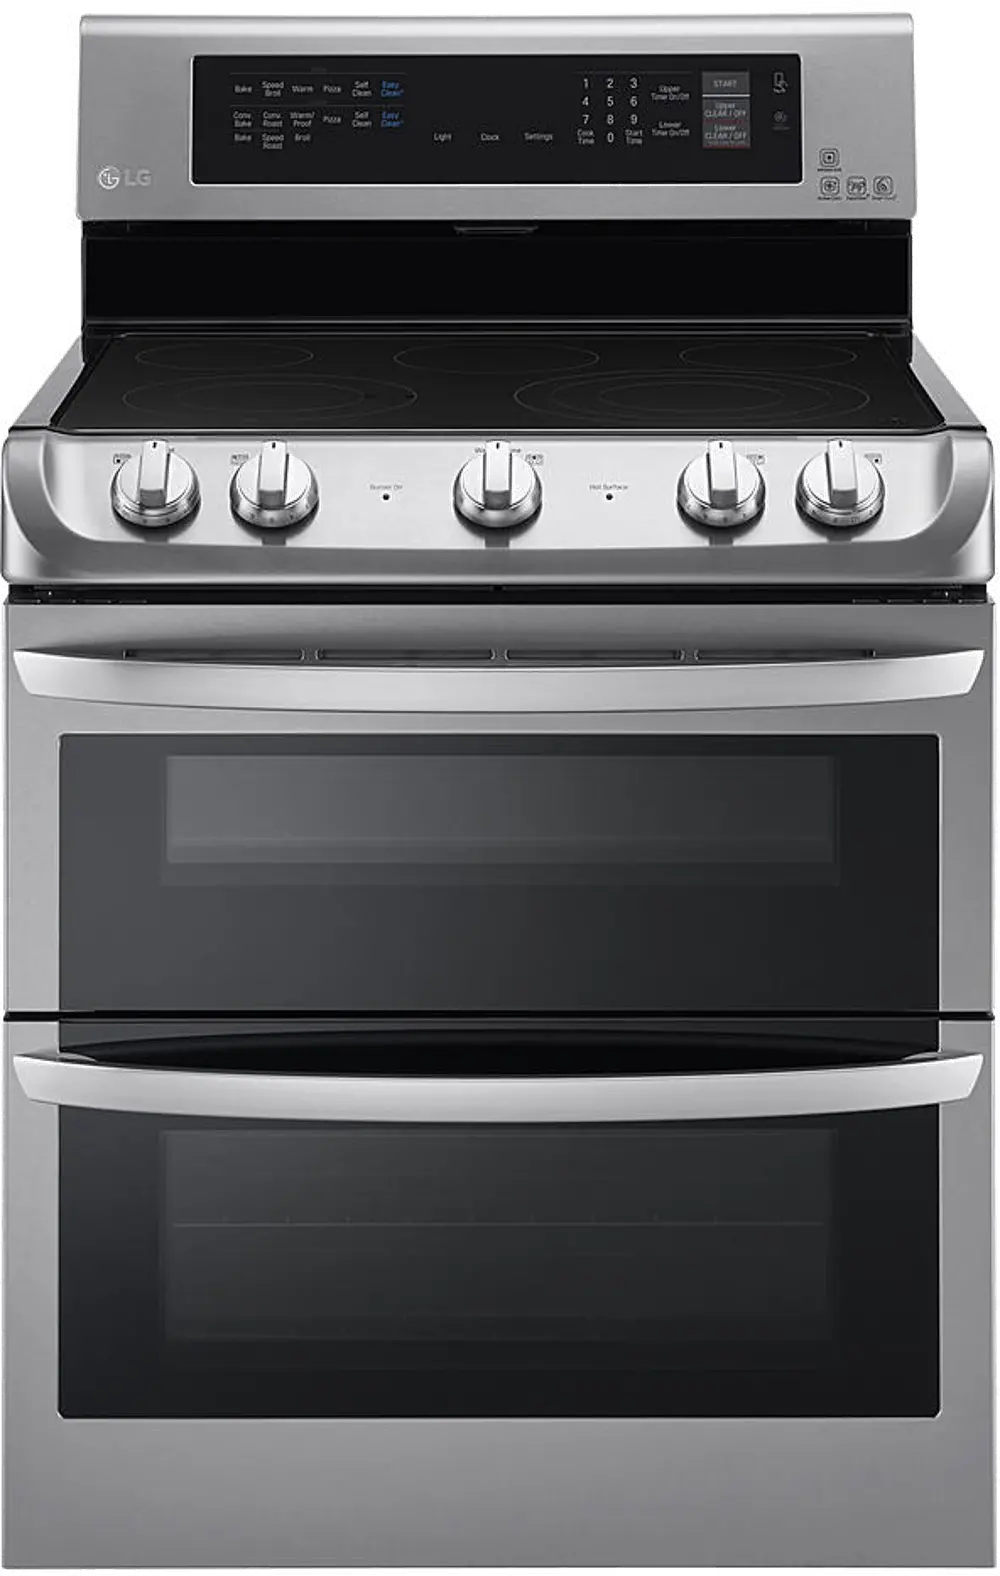 LDE4415ST LG Double Oven Electric Convection Range - 7.3 cu. ft. Stainless Steel-1